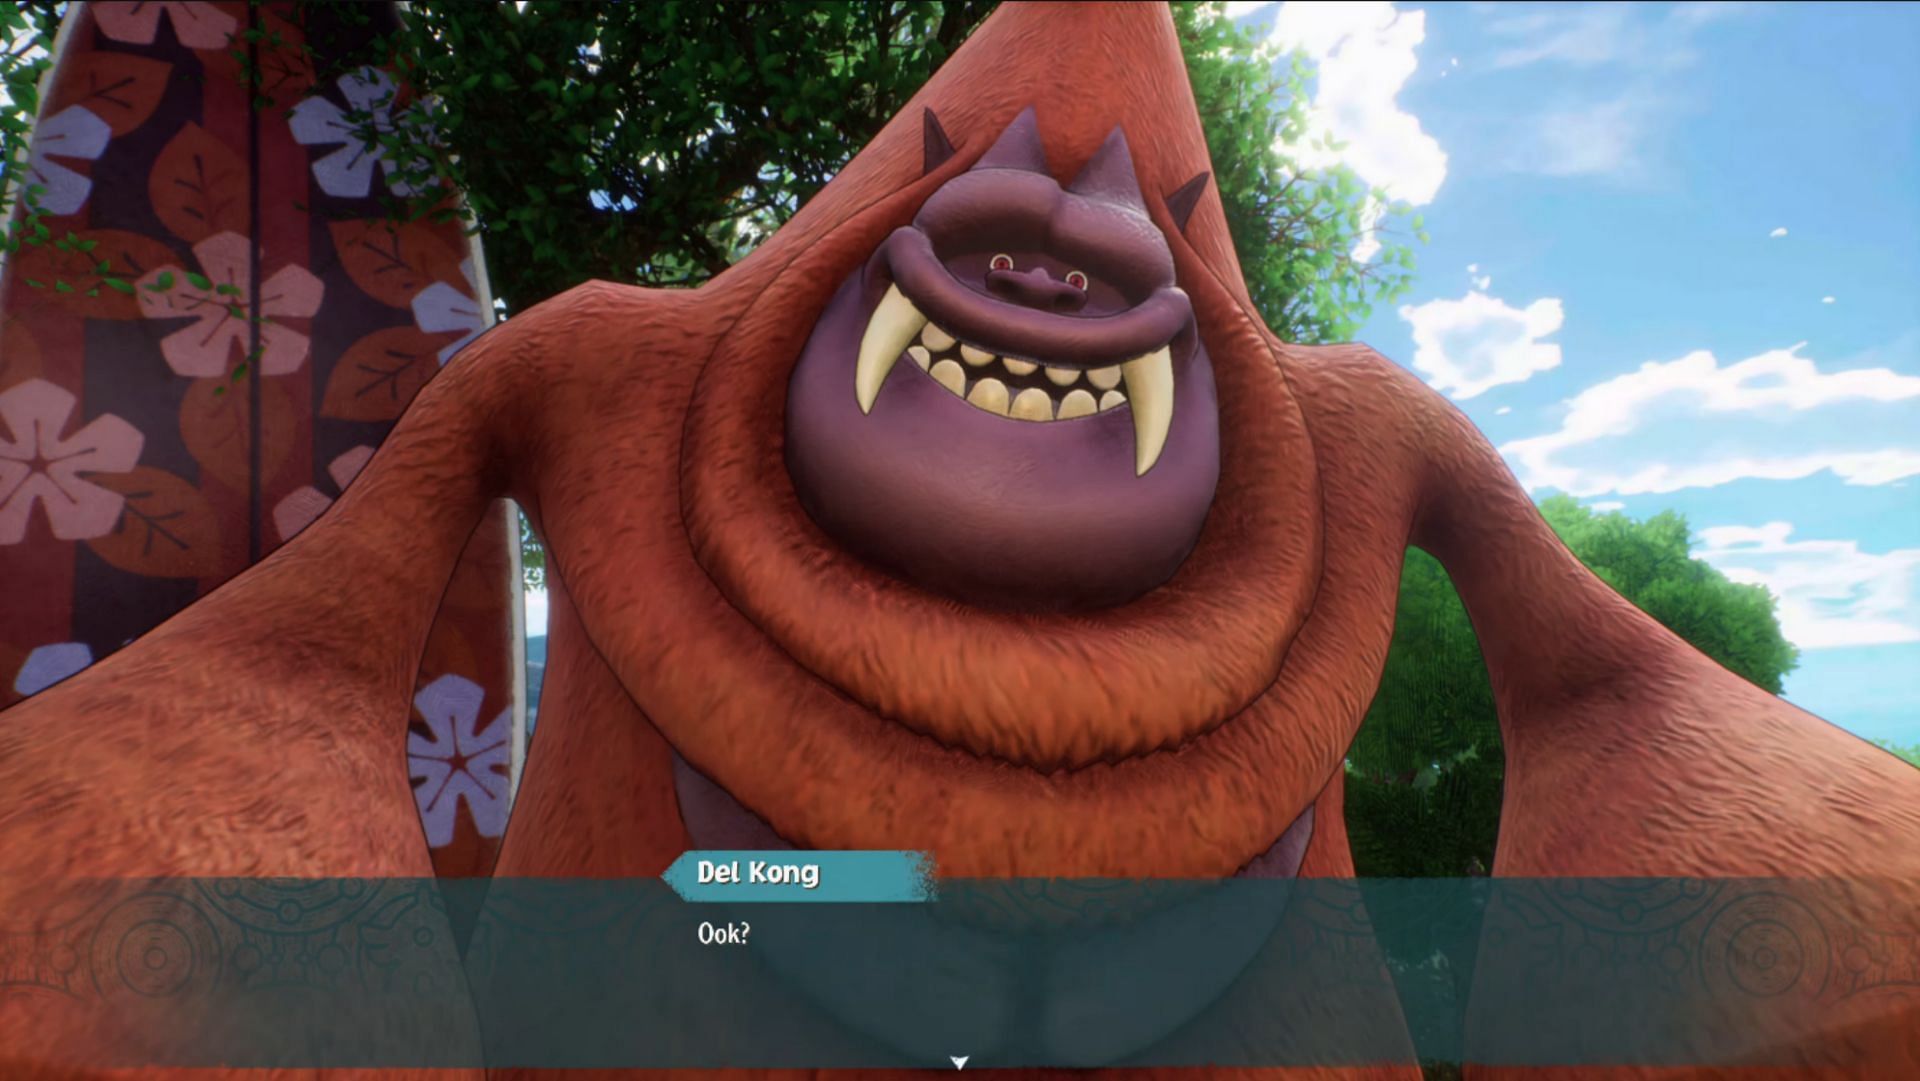 Del Kong is the first boss for One Piece Odyssey.